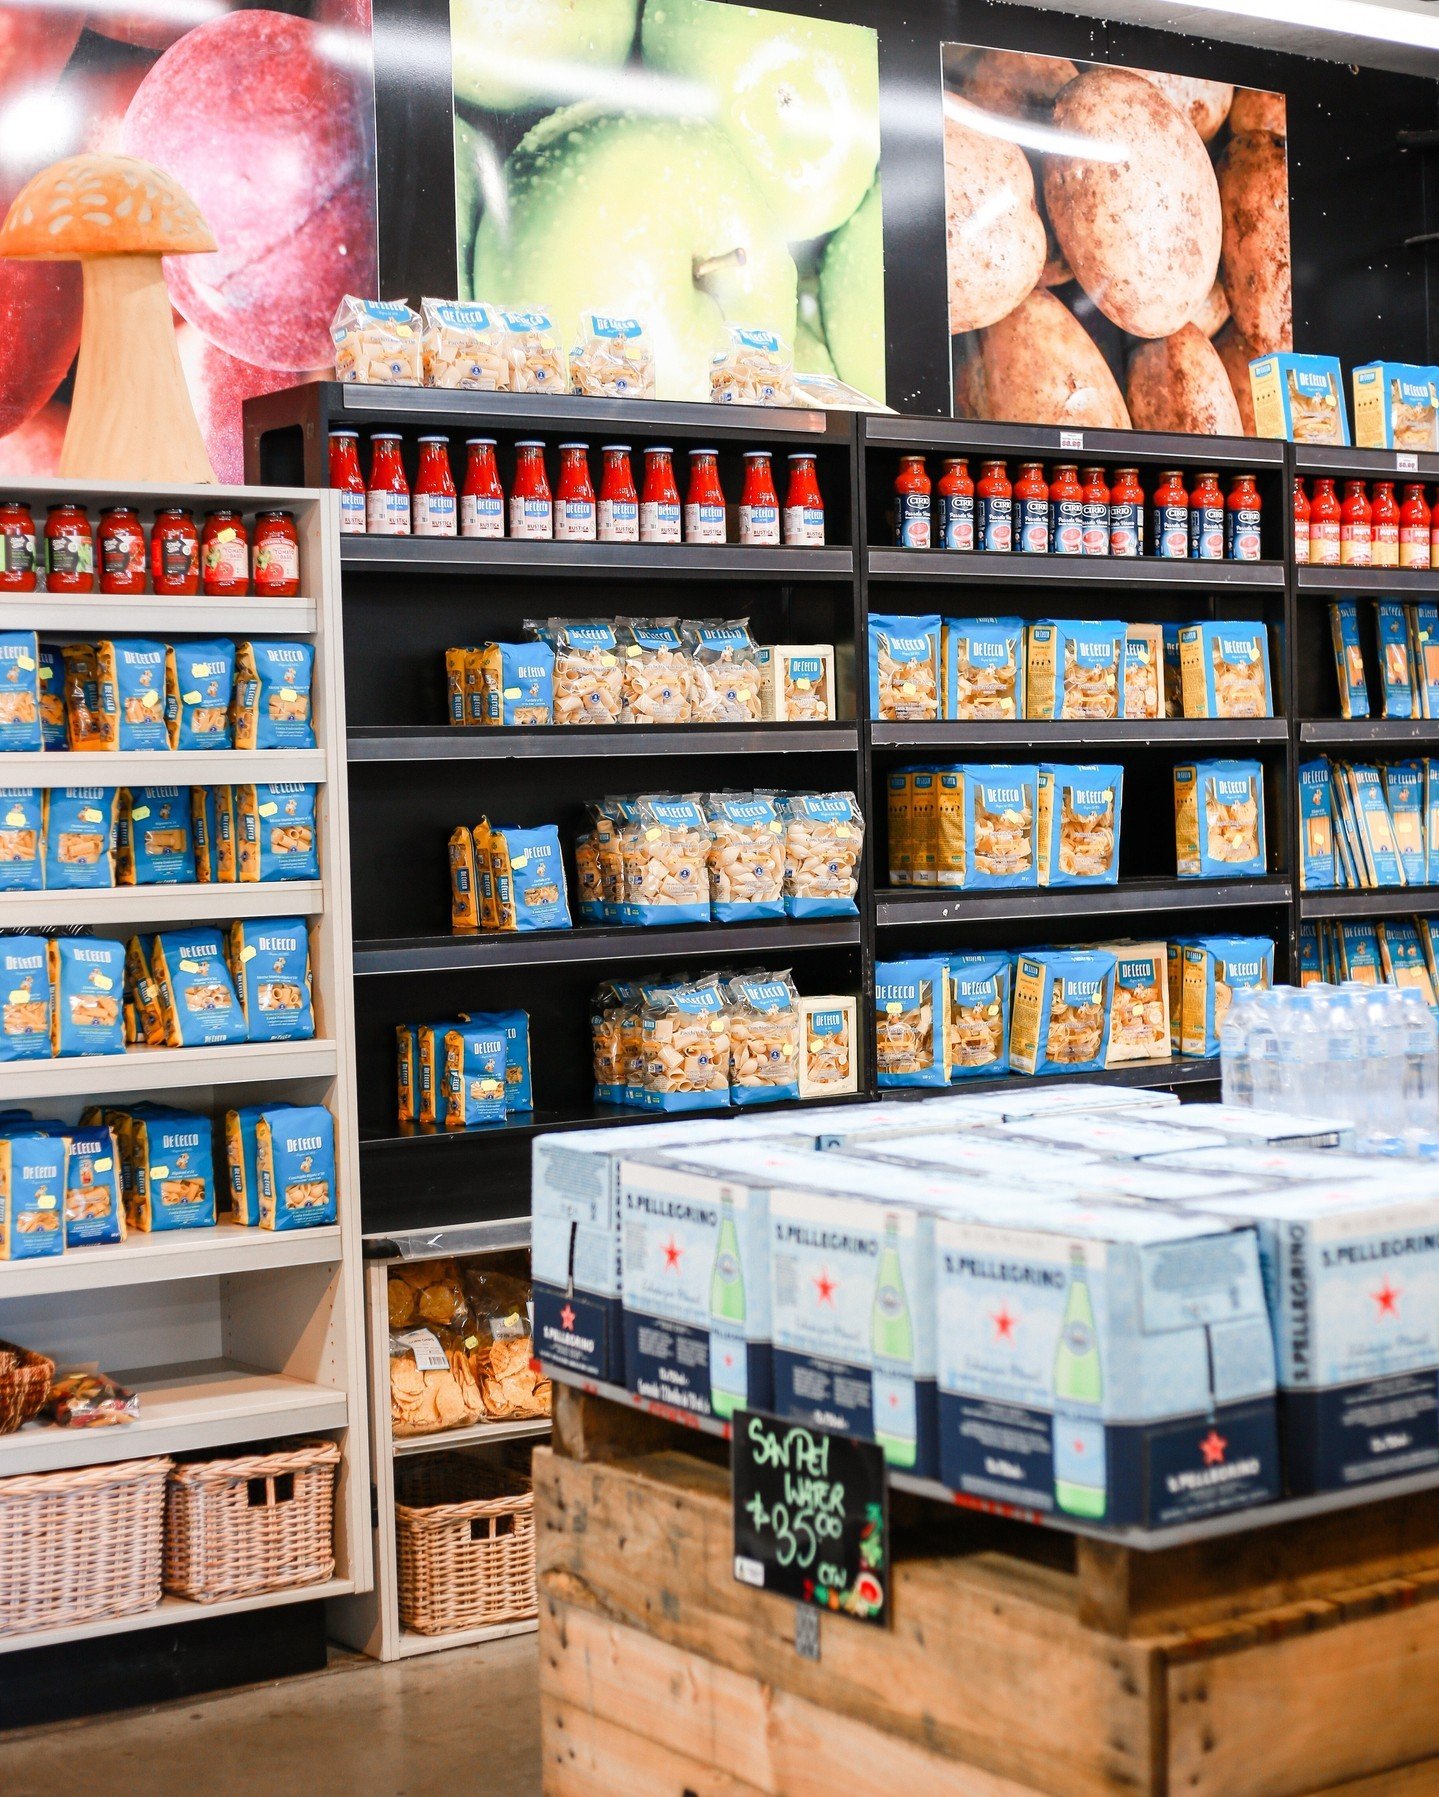 @trugolds.canberra's new pasta section has us inspired! With a great variety of fresh ingredients and premium pasta, the dinner possibilities are endless. 💭 🍝

Puttanesca, anyone?